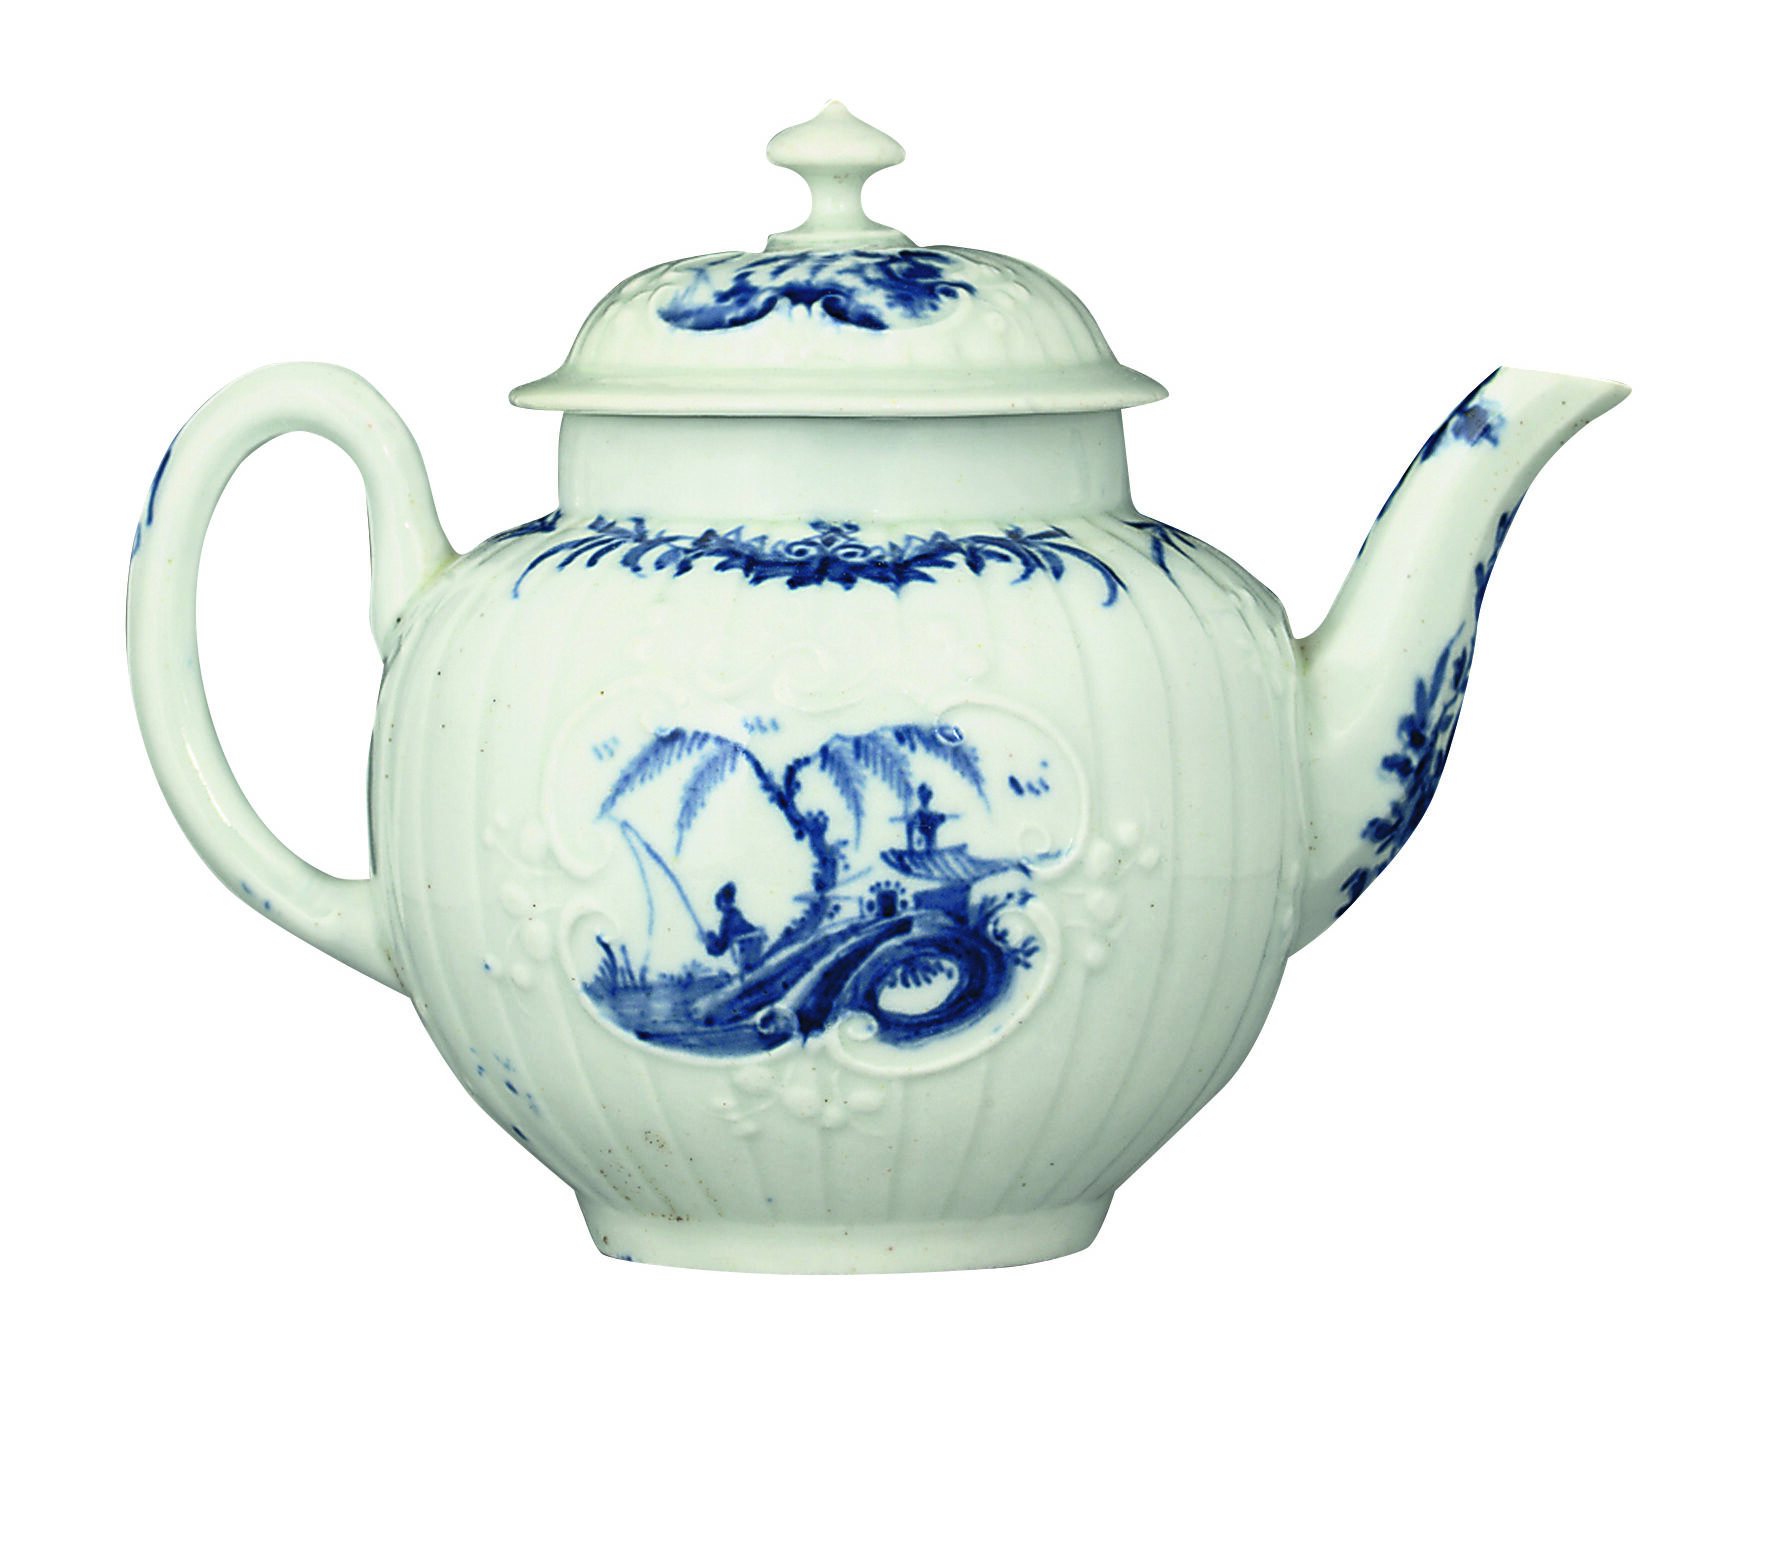 History of the teapot, different teapots, history, tea history and more